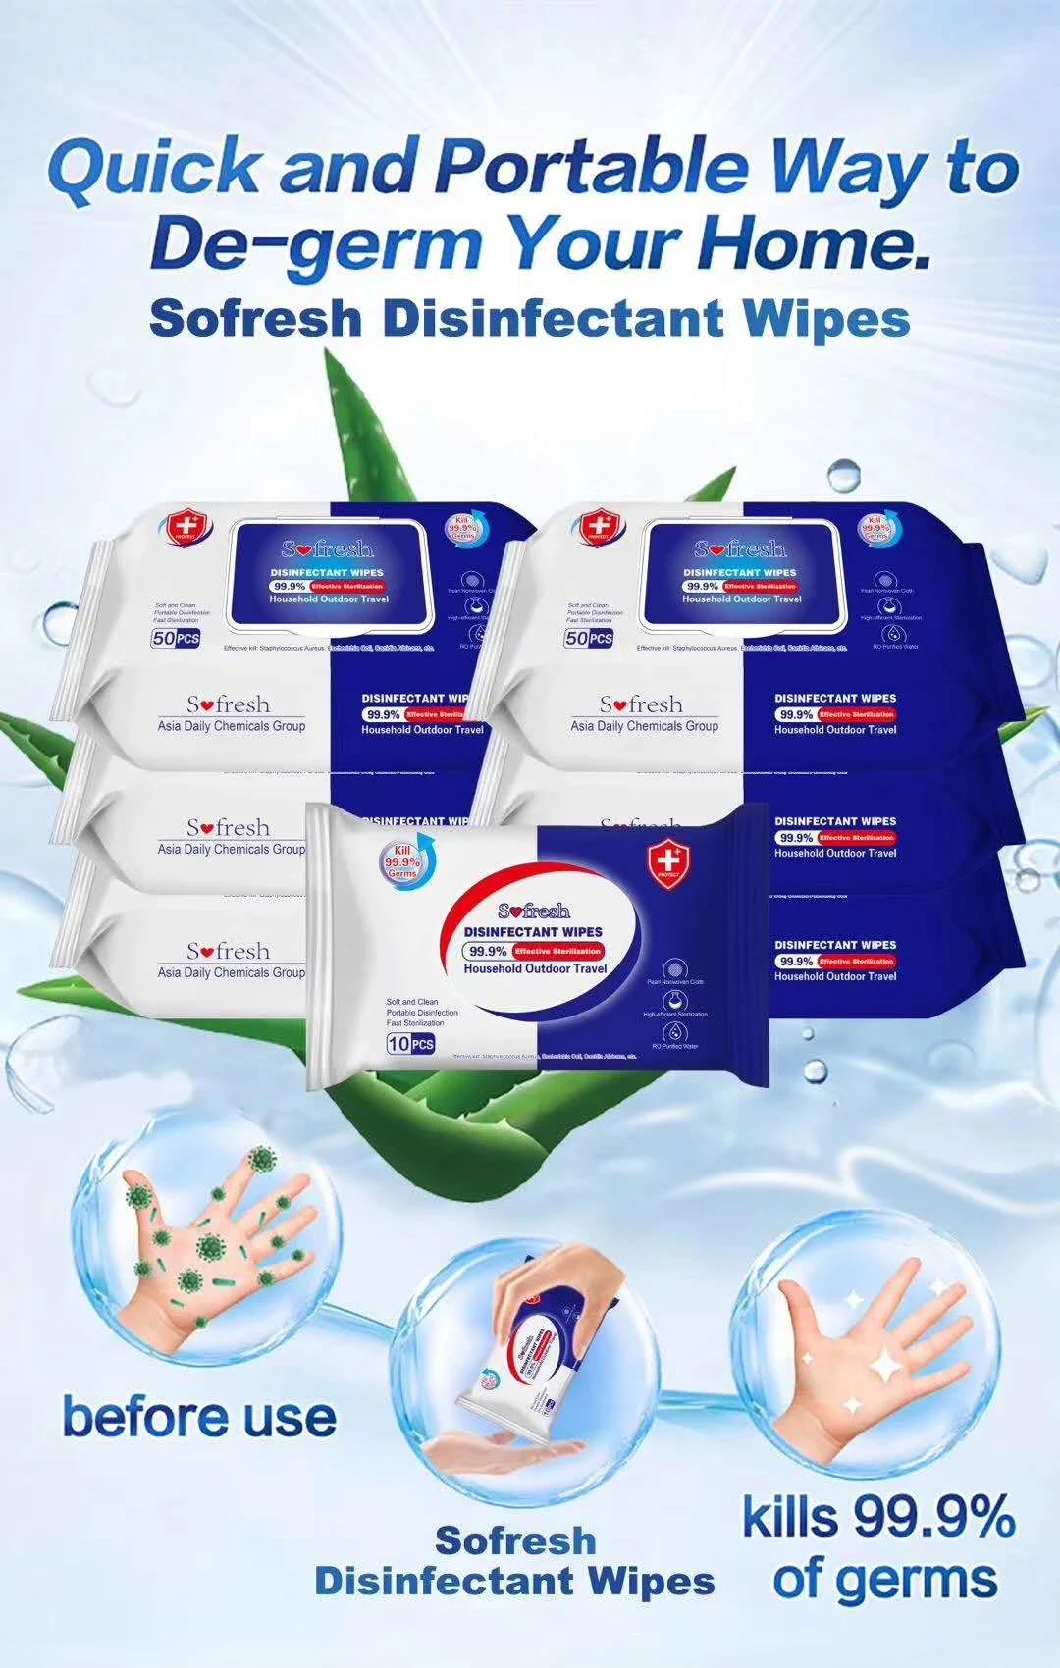 Disinfecting Wet Wipes/Tough Cleaning in a Thick Wet Wipes/Kills Cold & Flu Viruses75% Alcohol Wipes